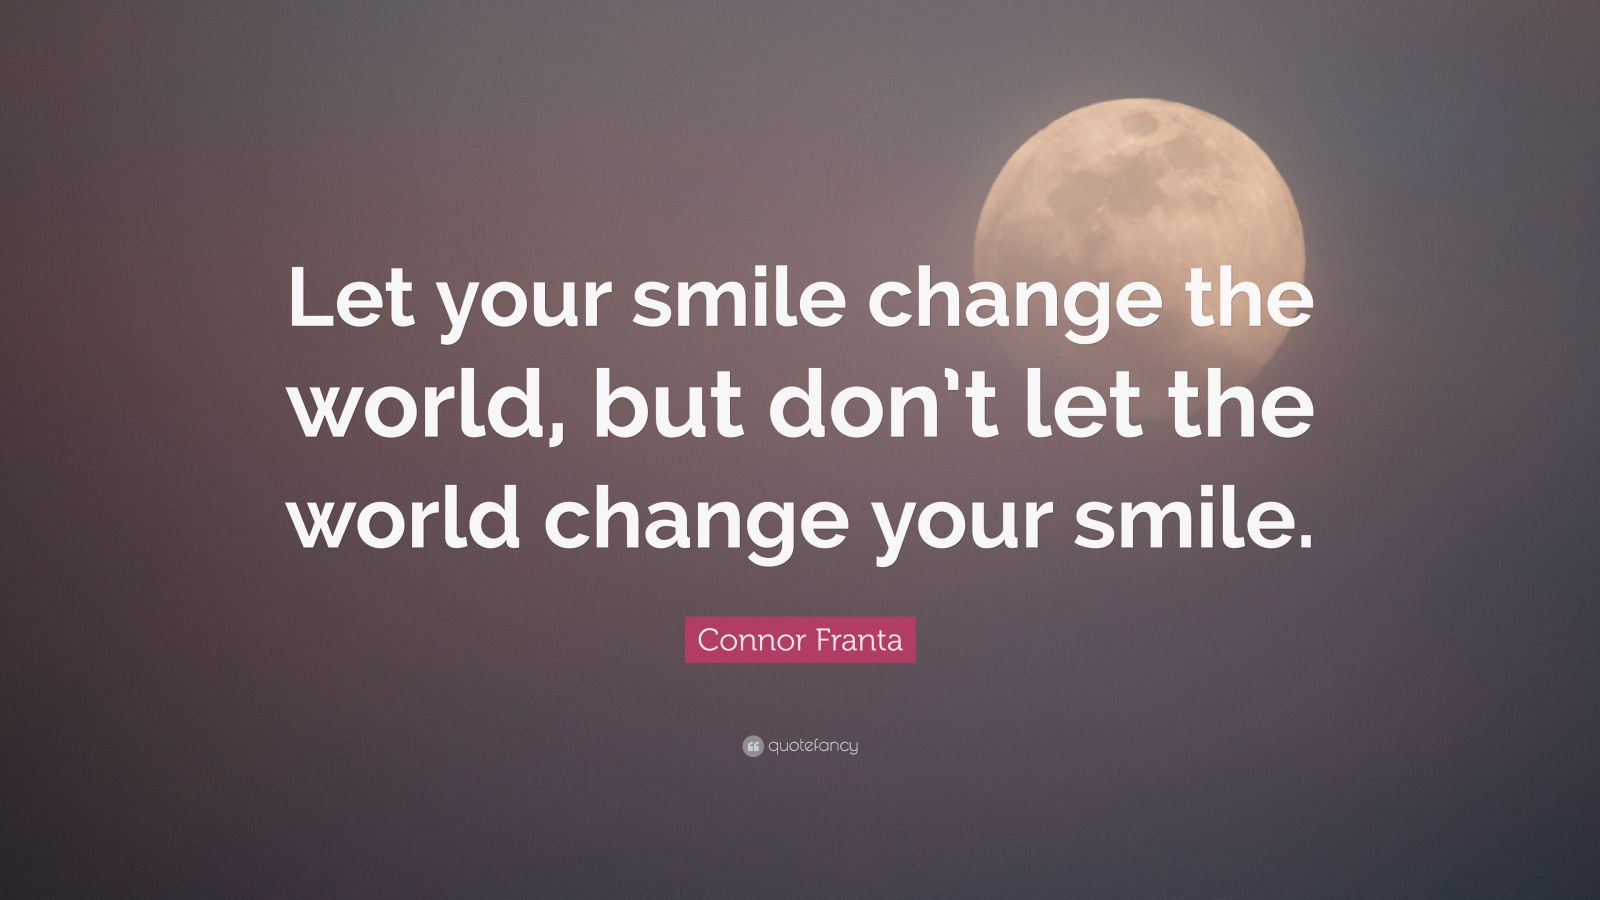 connor-franta-quote-let-your-smile-change-the-world-but-don-t-let